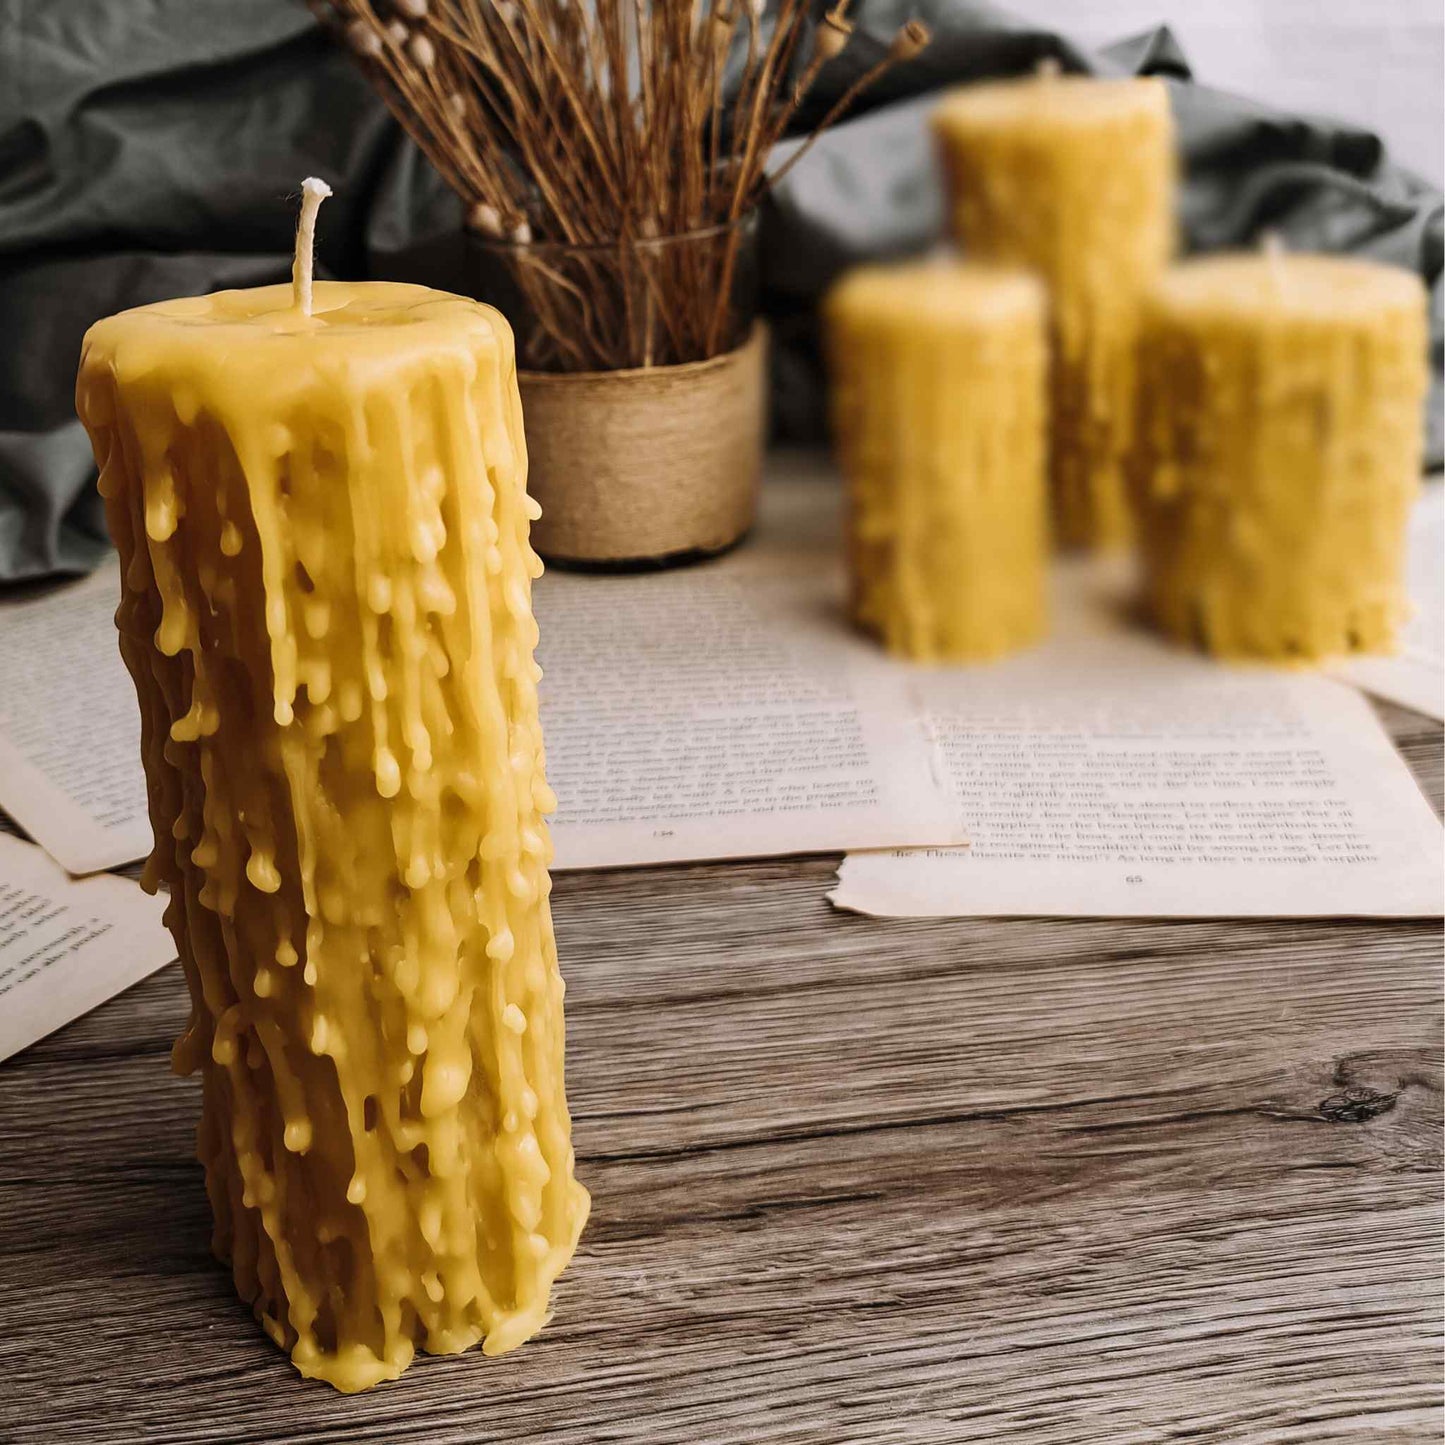 Elegant beeswax drip candles made from British beeswax, arranged on a vintage wooden table, enhancing a gothic decor